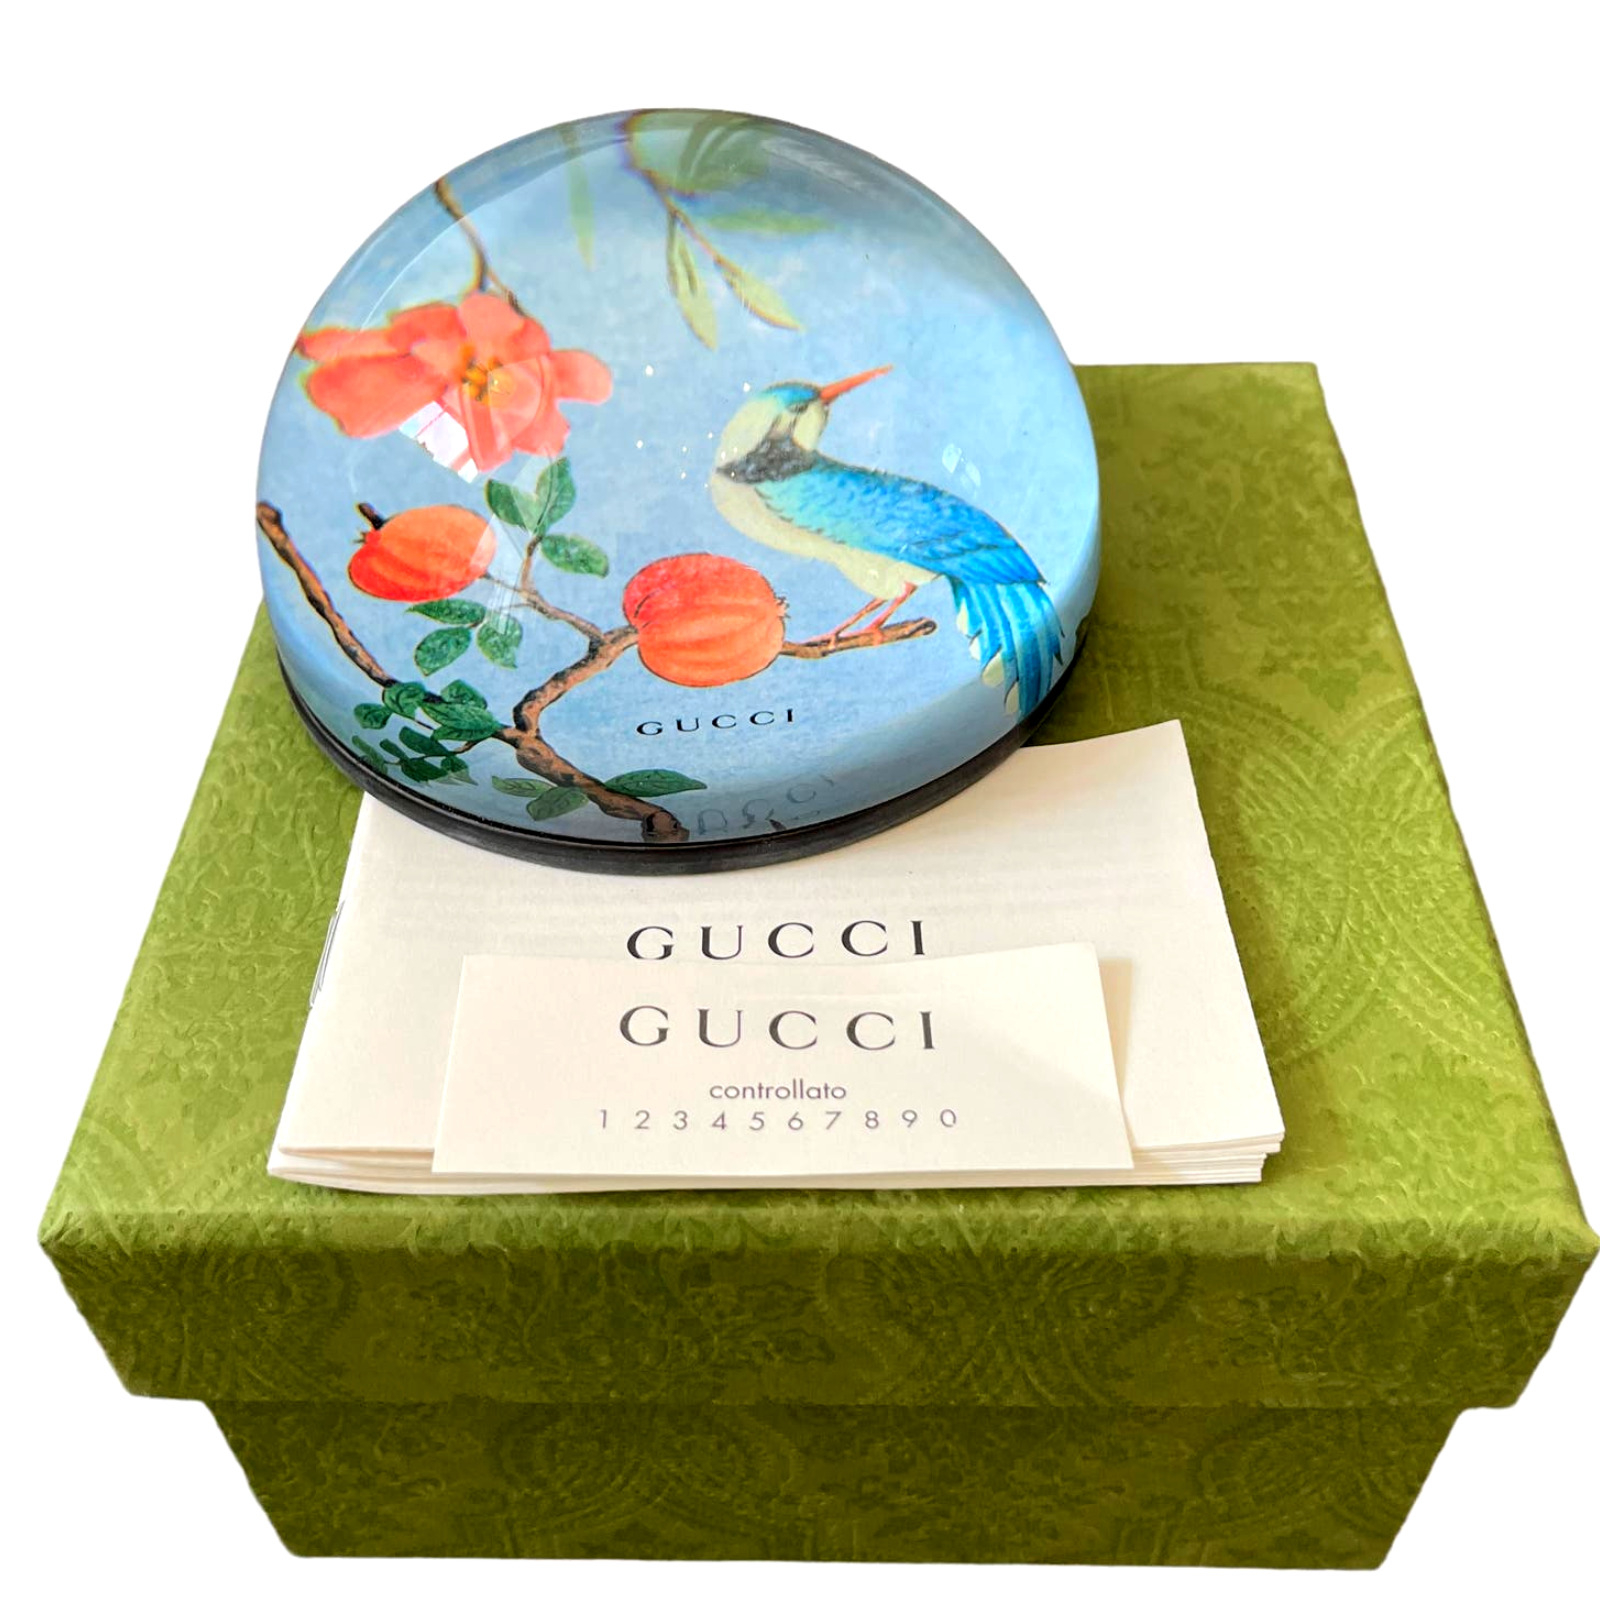 Authentic GUCCI Floral Bird Paperweight with Tian Print Blue Holiday Boxed Gift